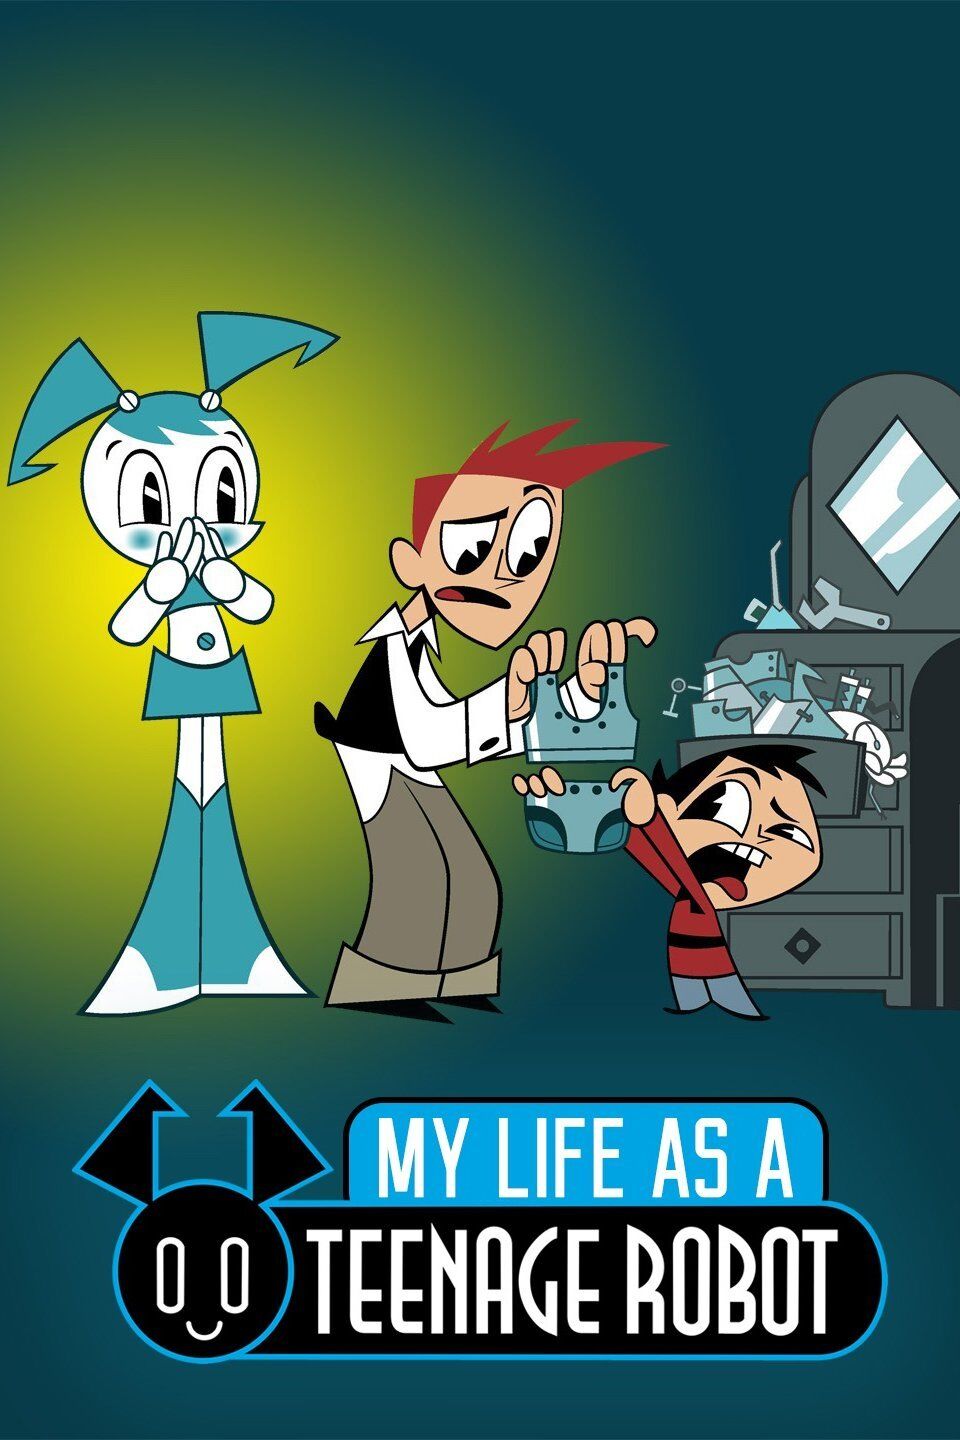 Robotboy Poster for Sale by Vegas Cara